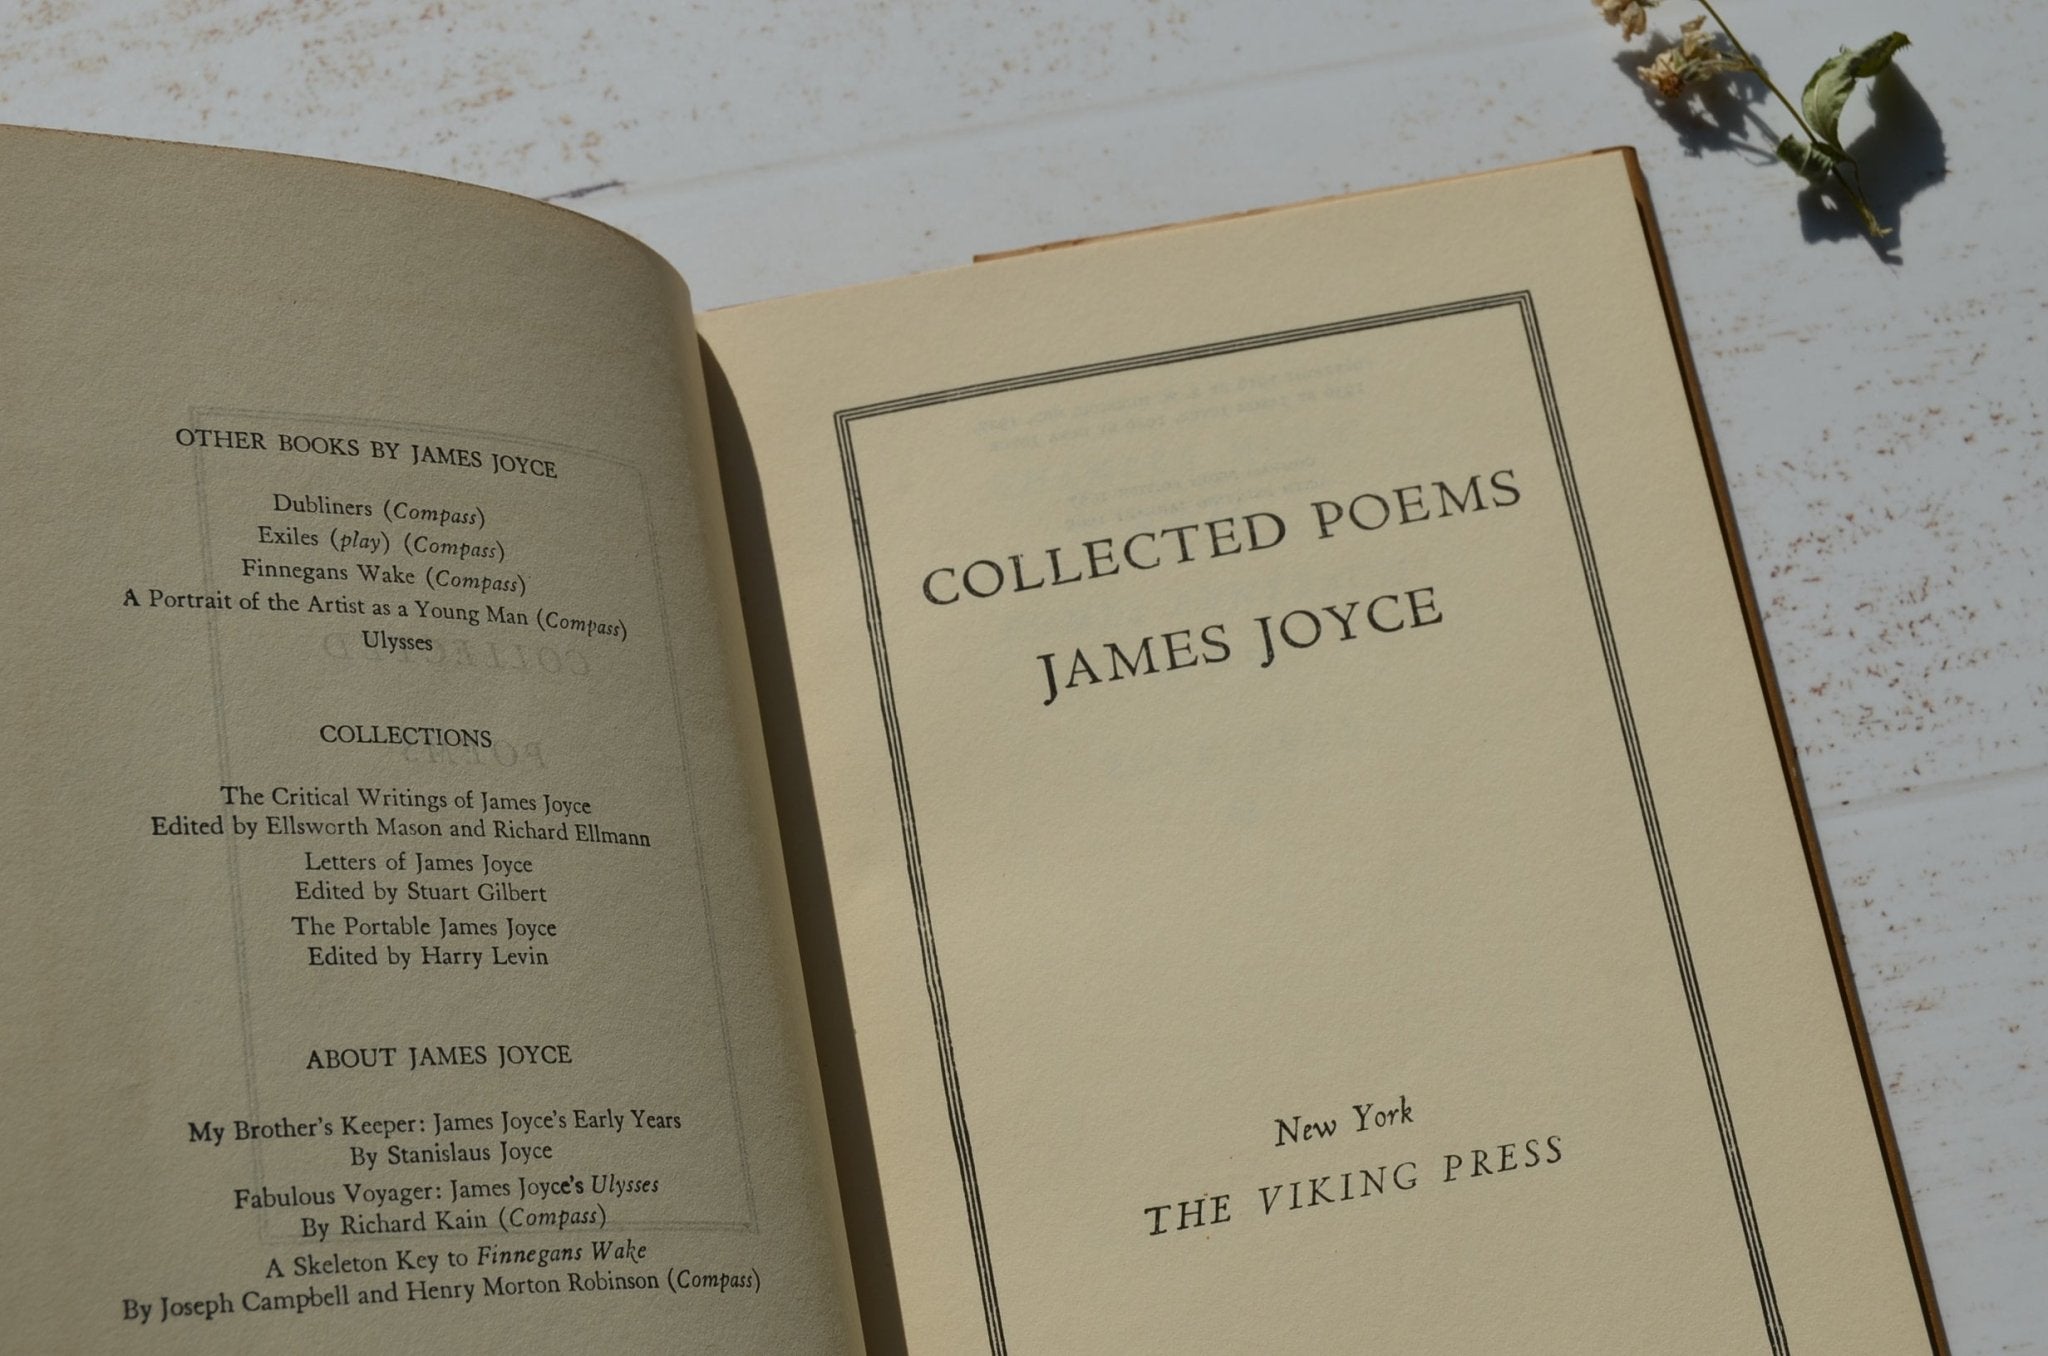 Sixth Printing – Collected Poems by James Joyce 1965 - Brookfield Books